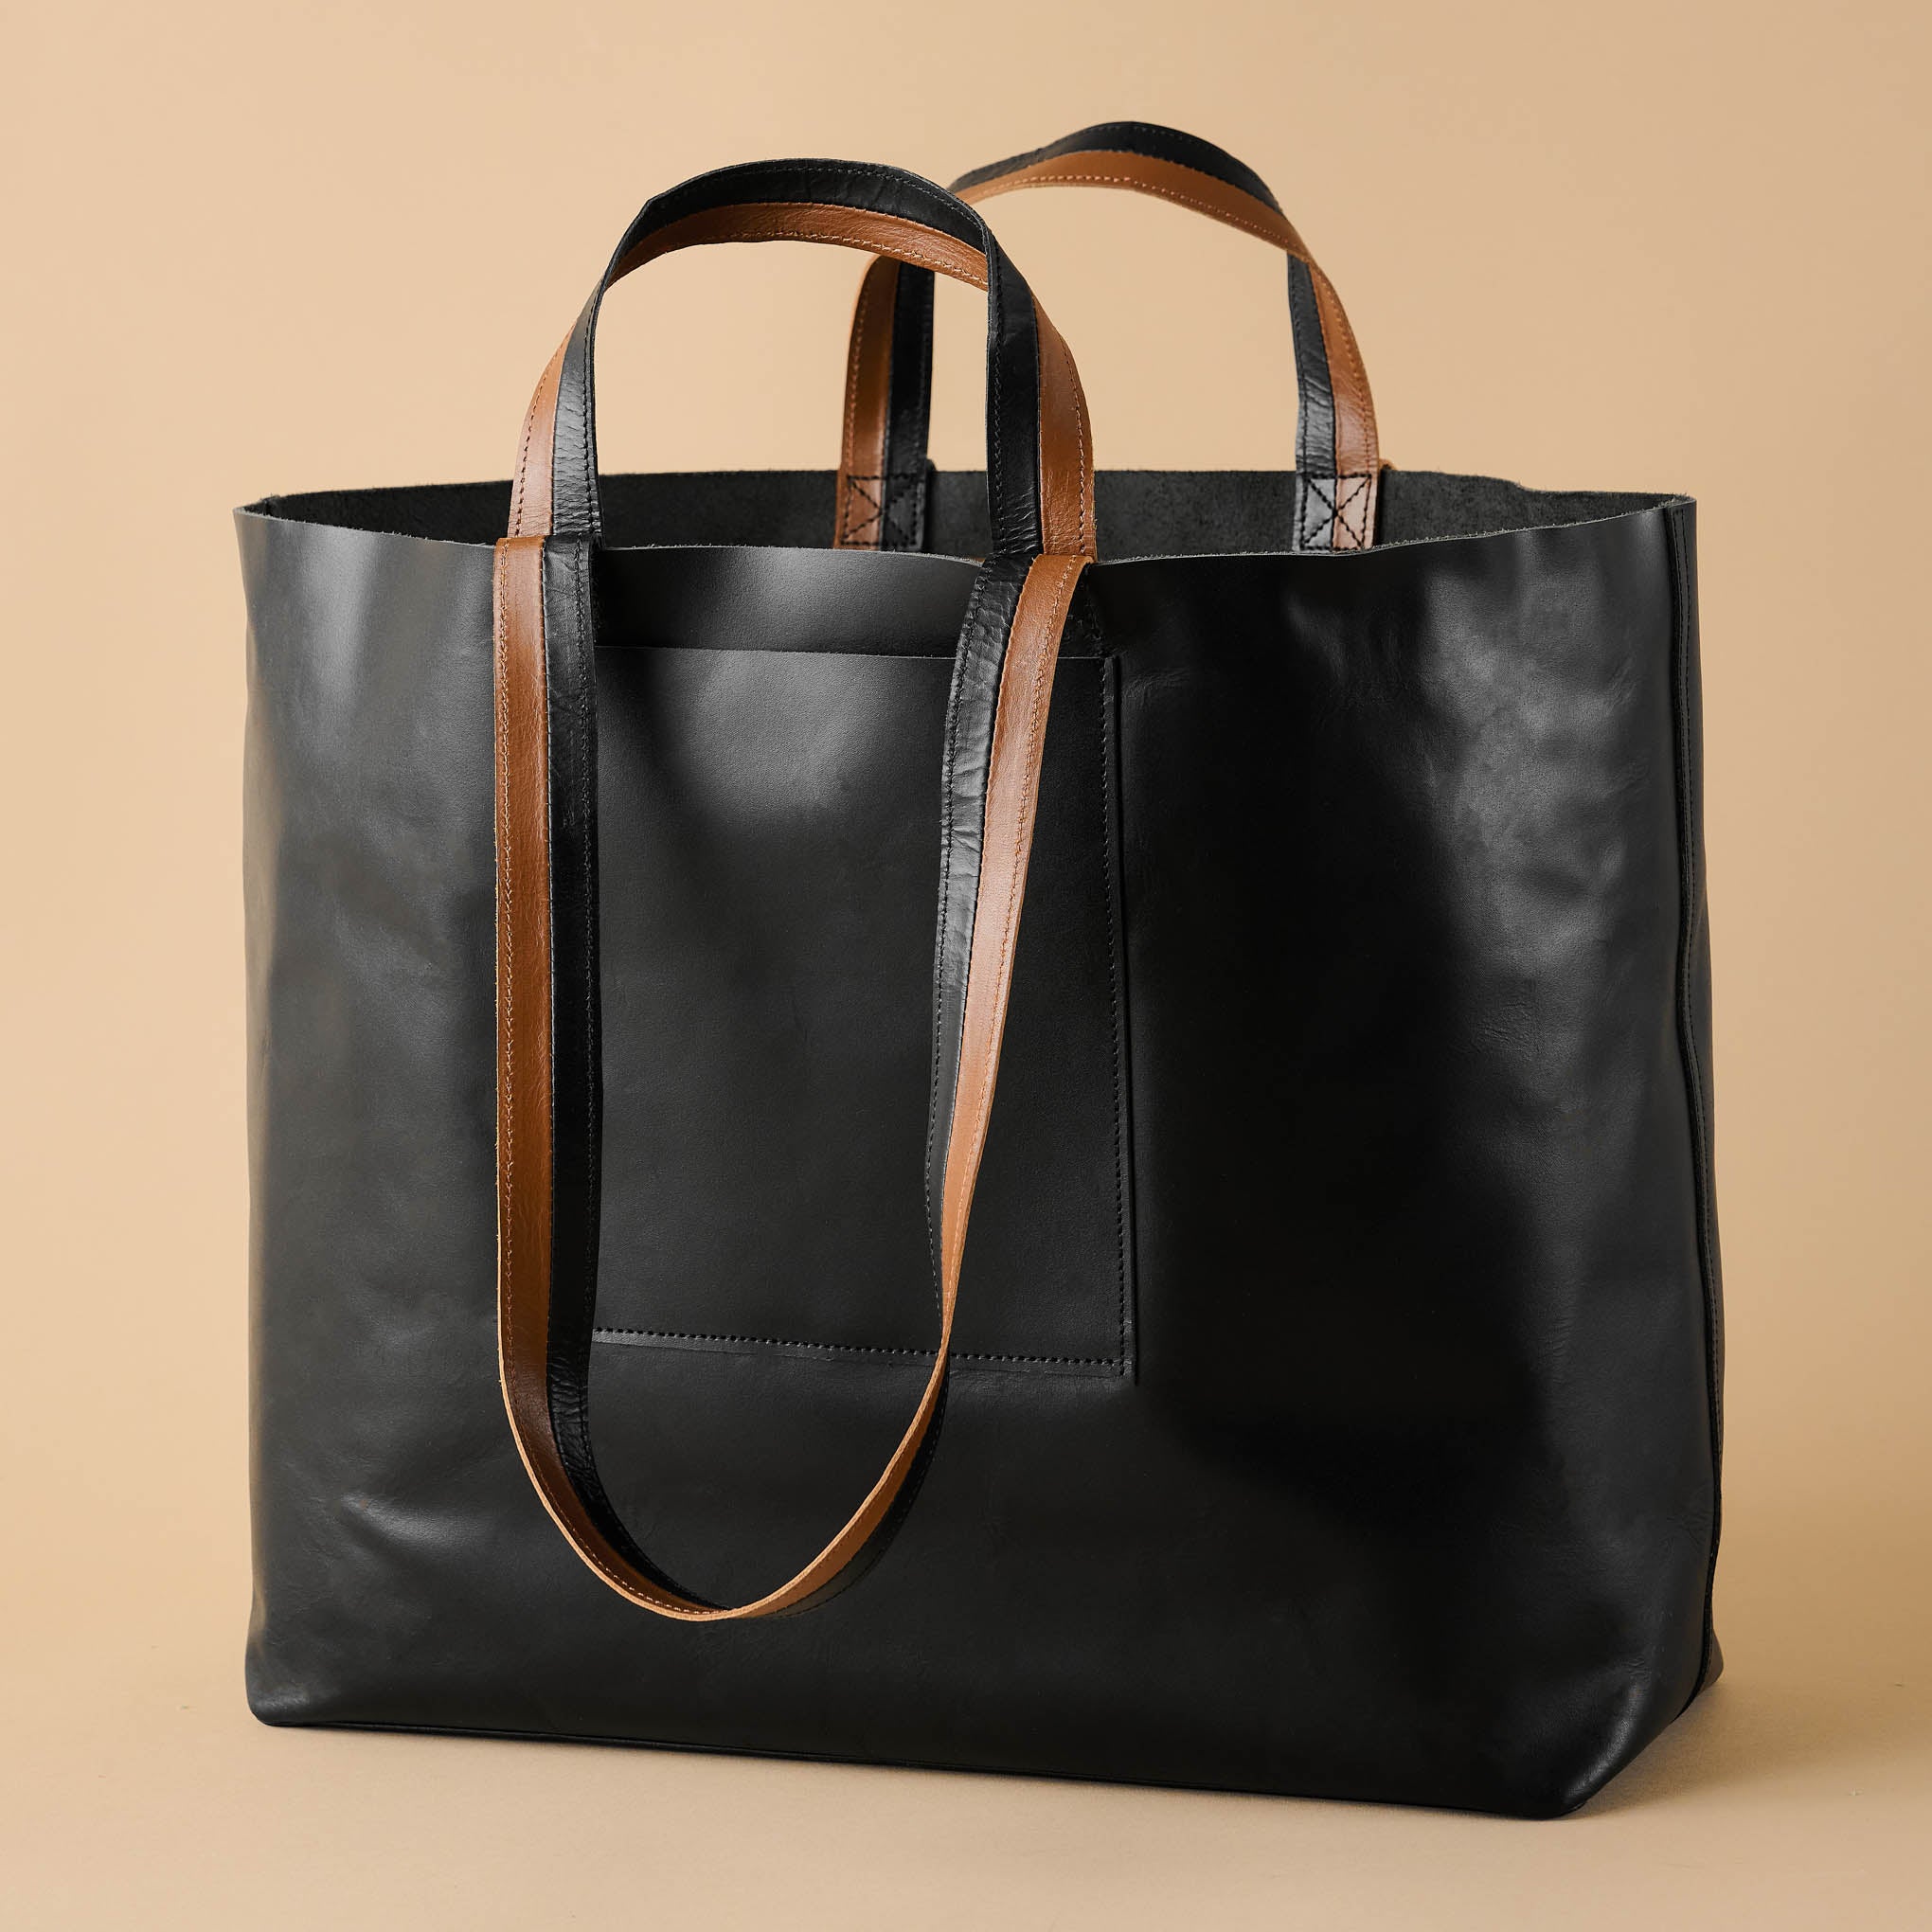 Men's Accessories With Dark Brown Leather Bags On Wooden Table